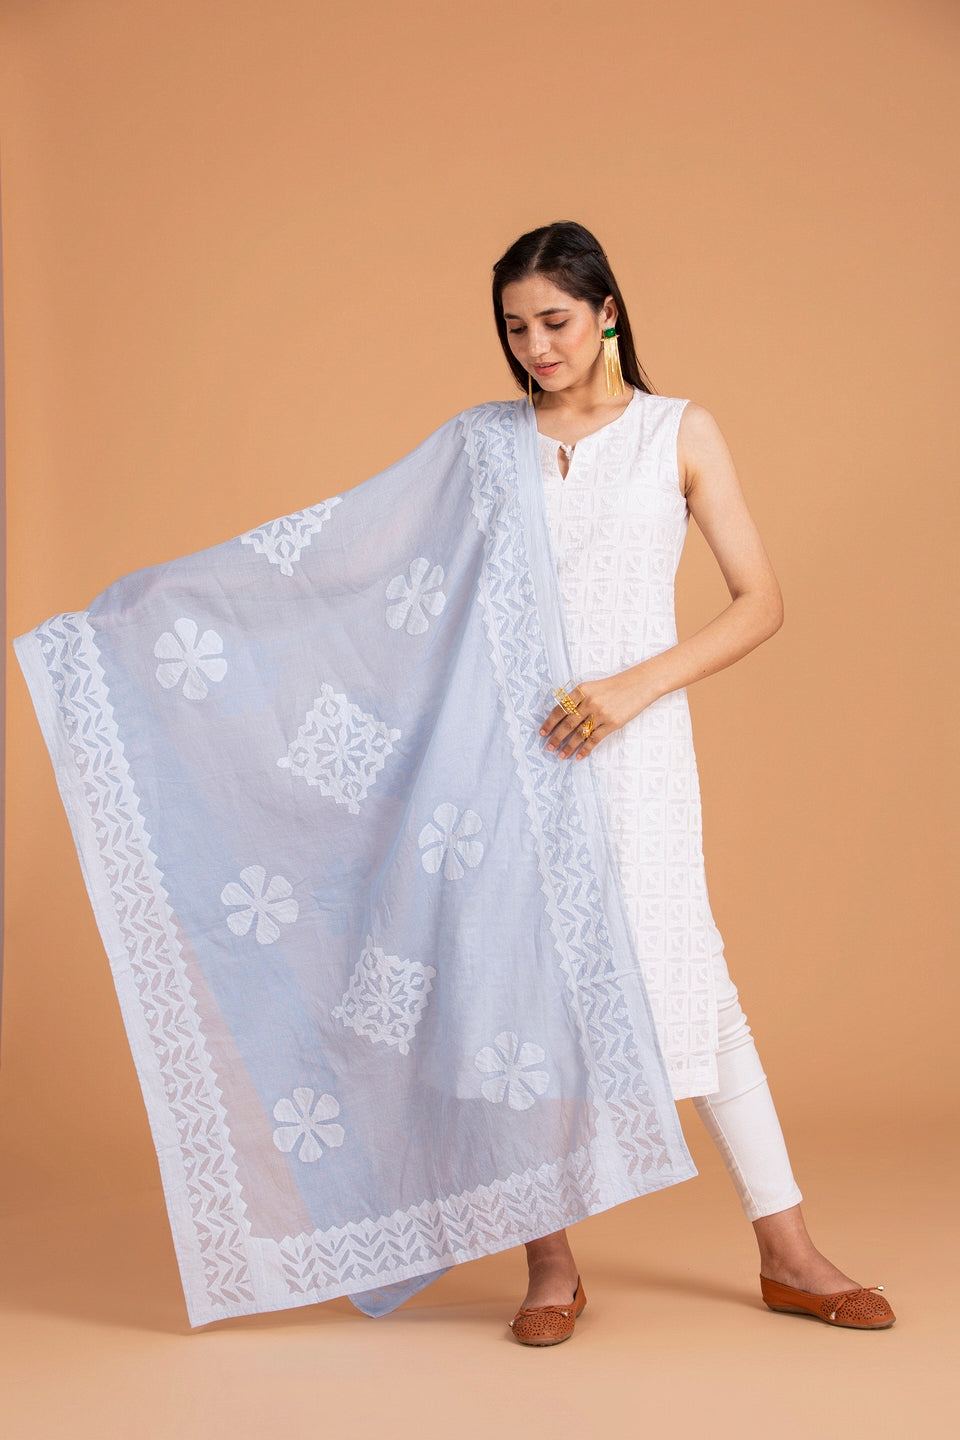 Duppatta Floral Diamond Applique Cotton with Single One sided Khuddi Border, Baby Blue